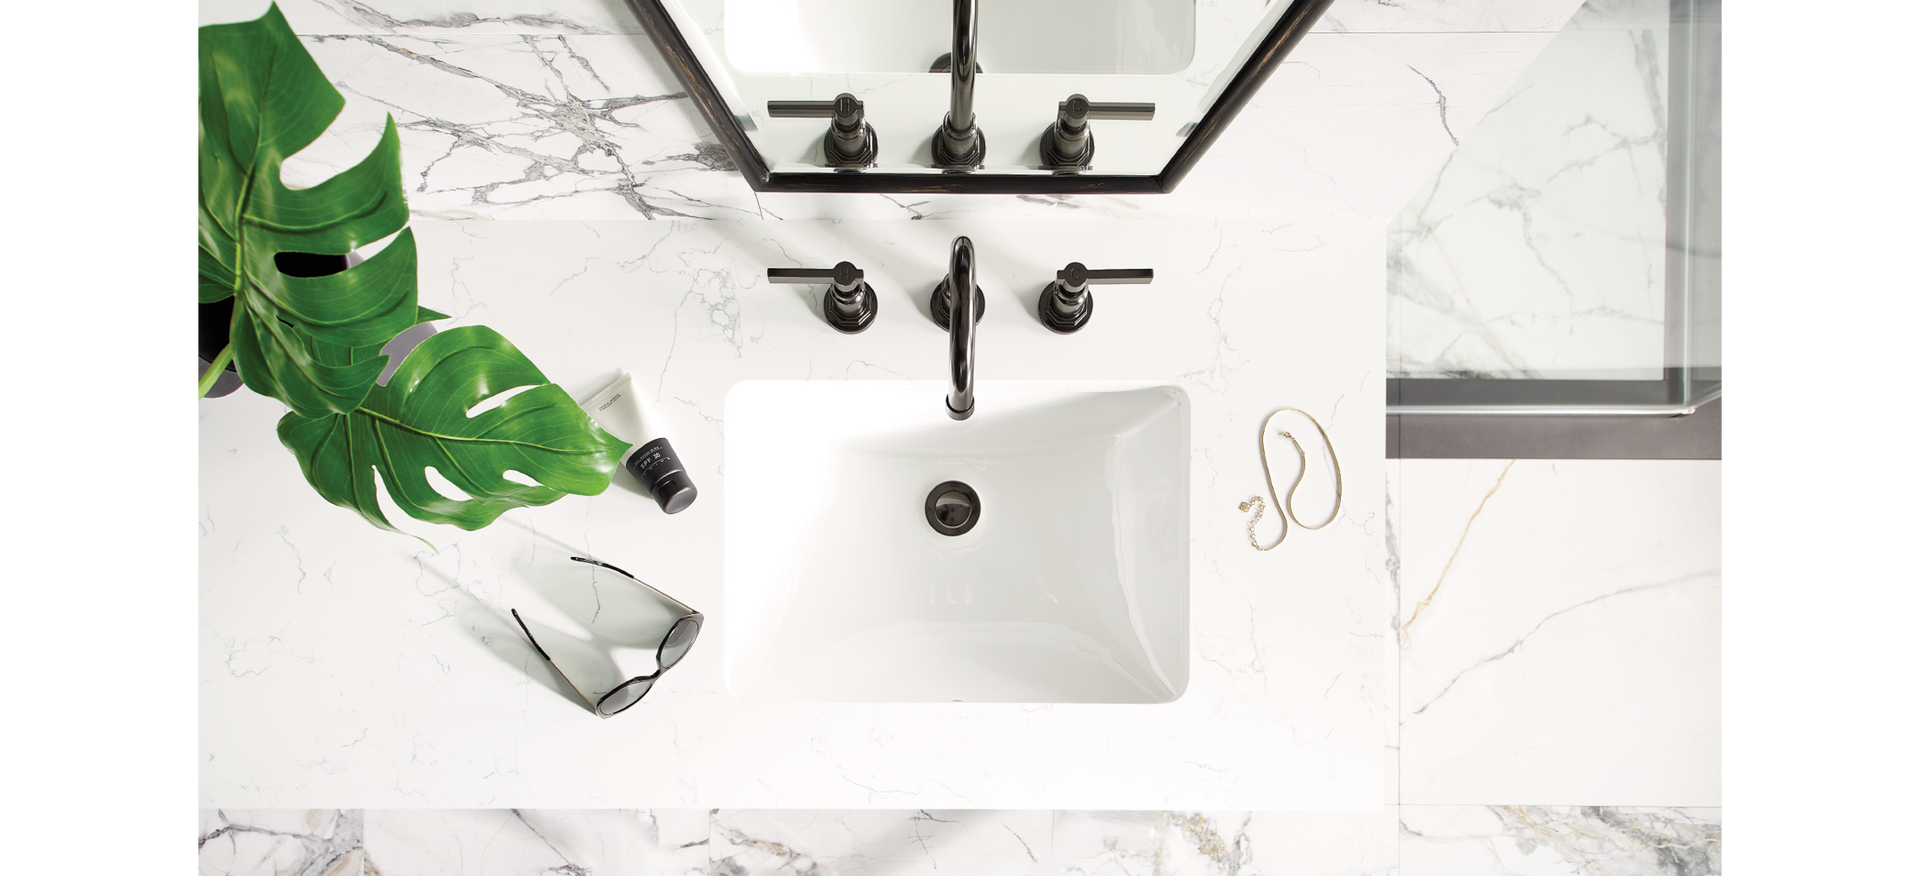 Greyfield Freestanding Faucet in Gunmetal on a Feathered White Quartz Vanity Top for quartz countertop care and maintenance